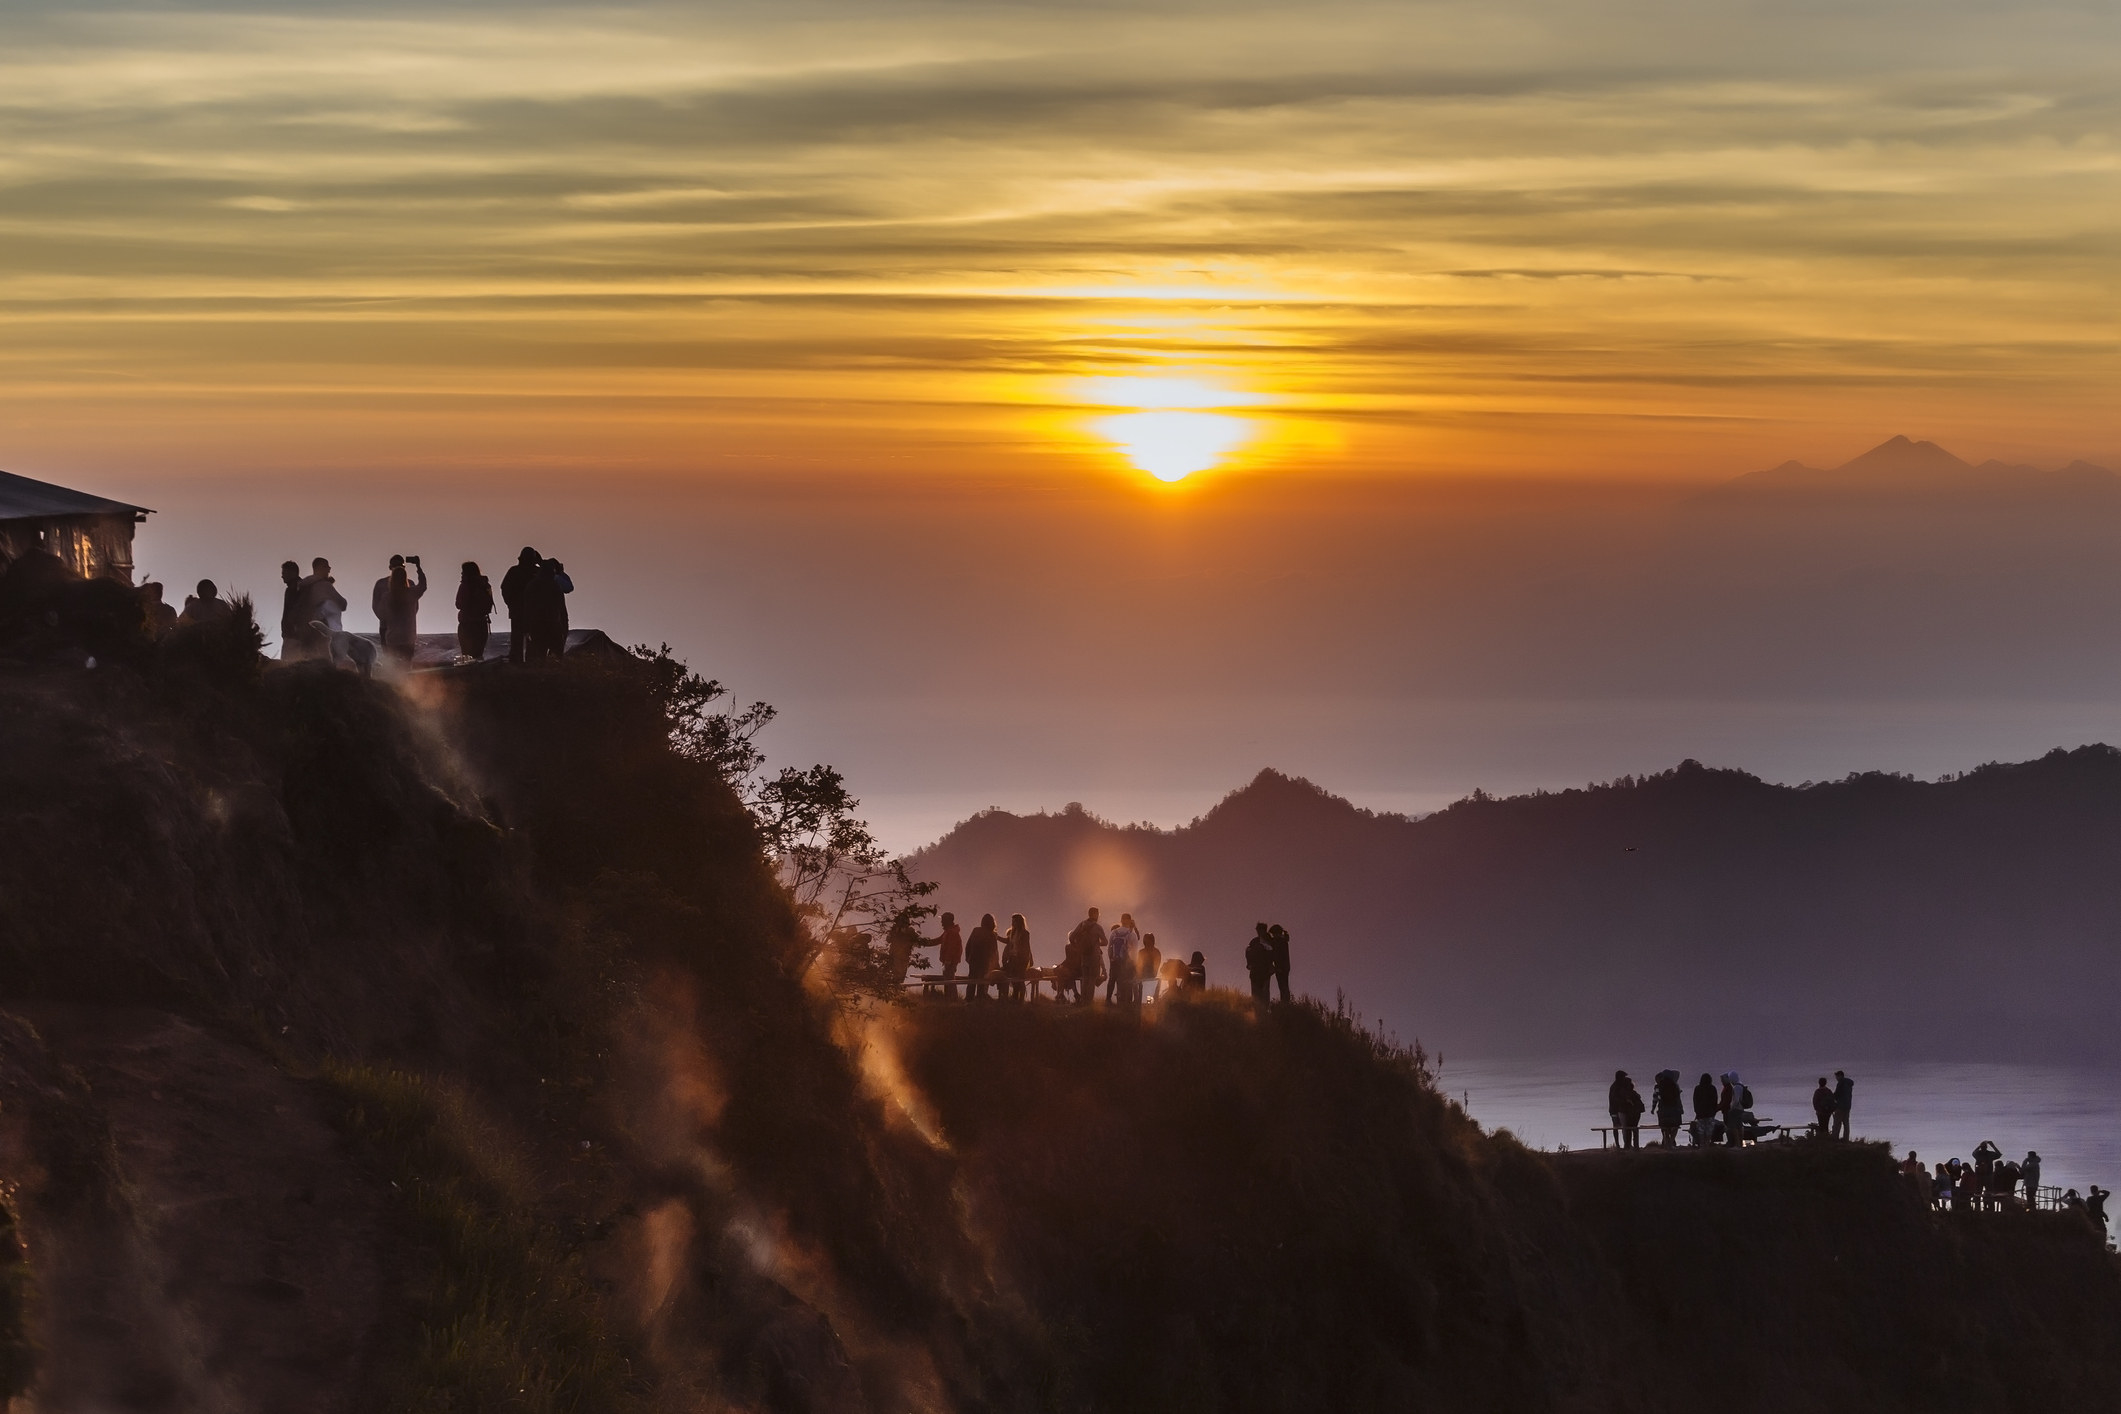 Silhouettes of people at sunset, Mount Batur, Bali.